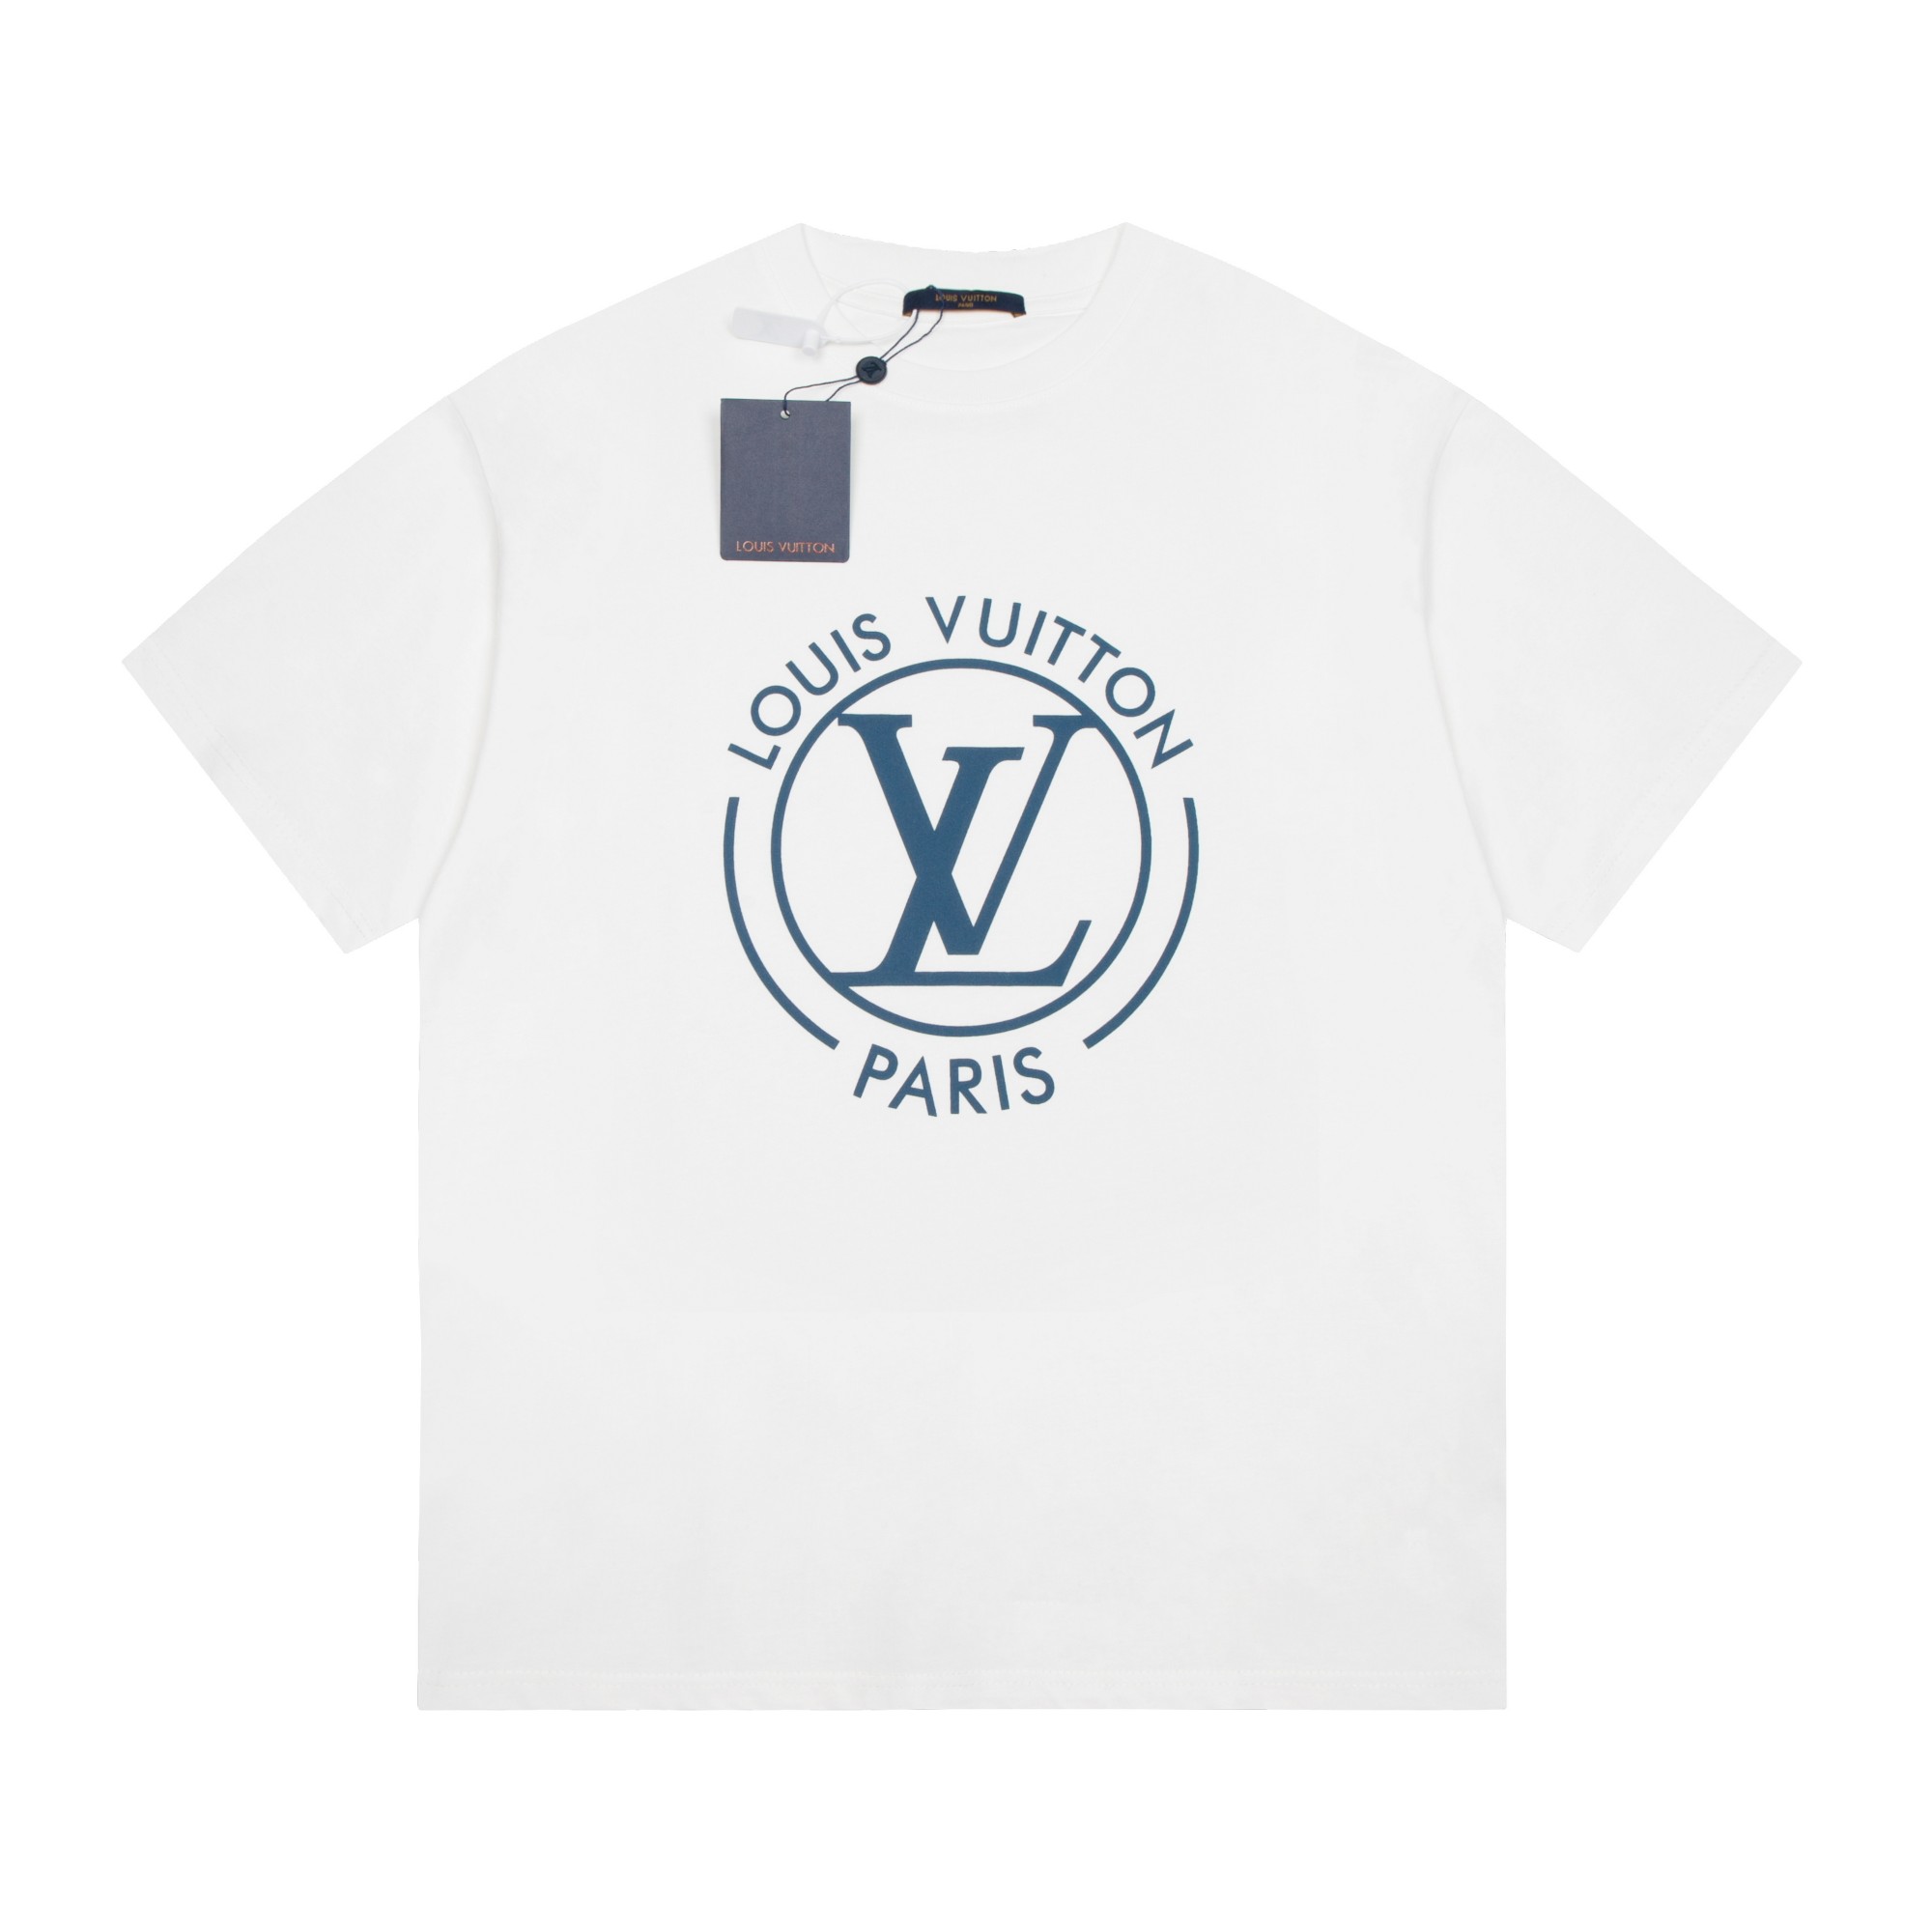 Louis Vuitton Clothing T-Shirt Printing Unisex Combed Cotton Short Sleeve